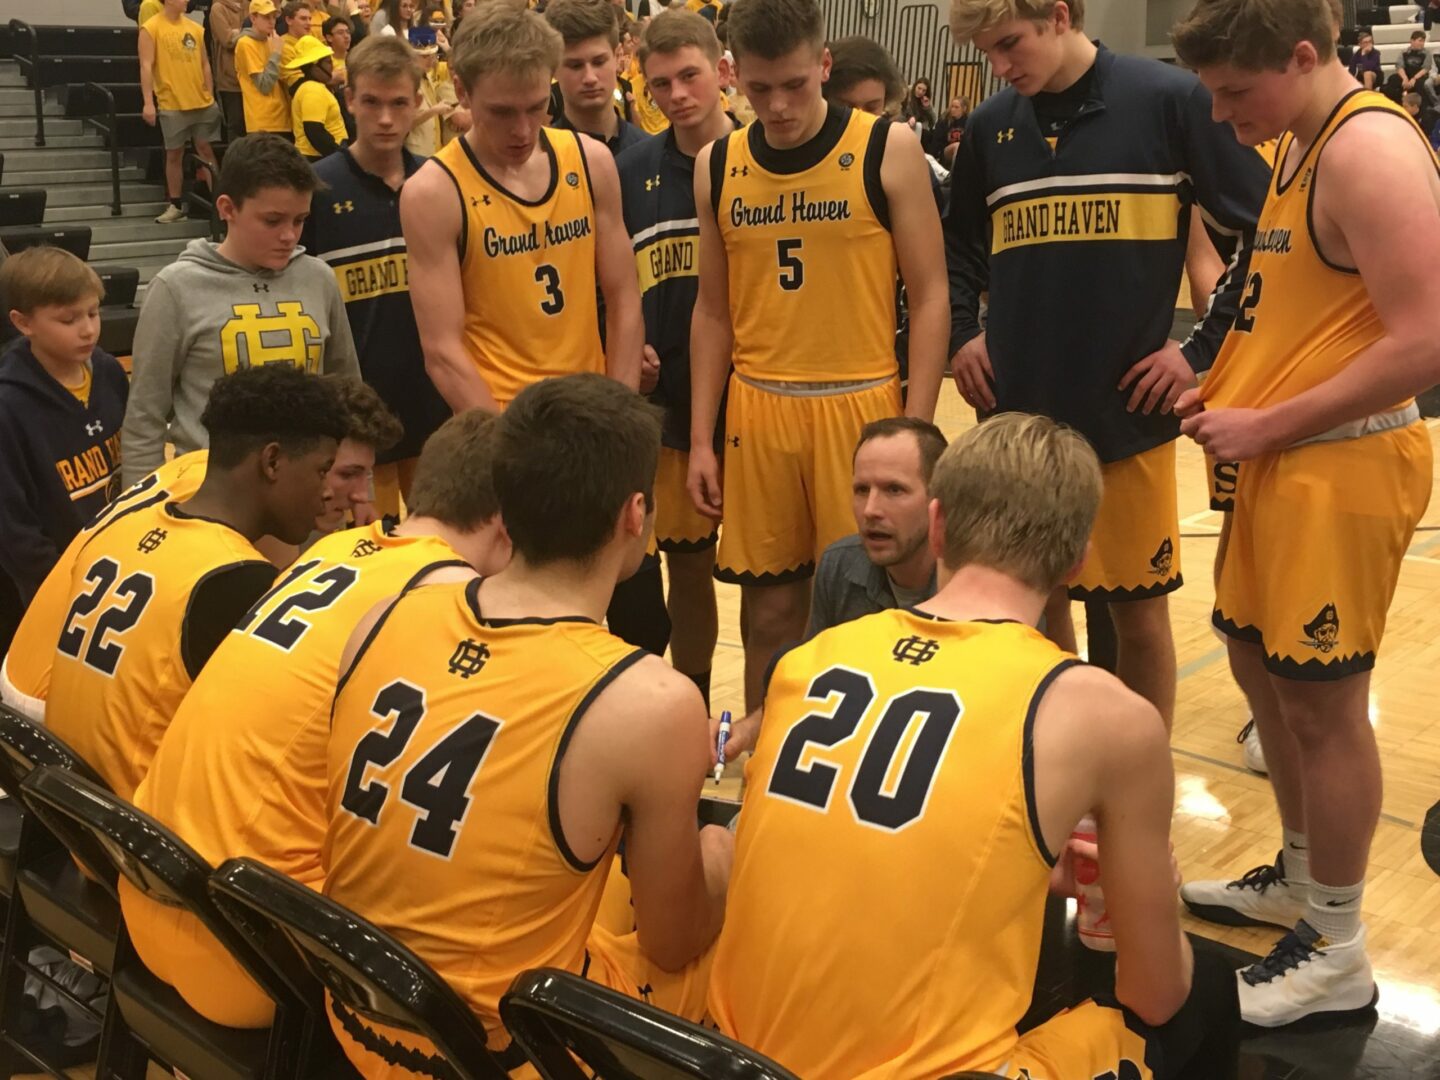 A tough second half sends Grand Haven boys to their first loss, 58-45 to West Ottawa